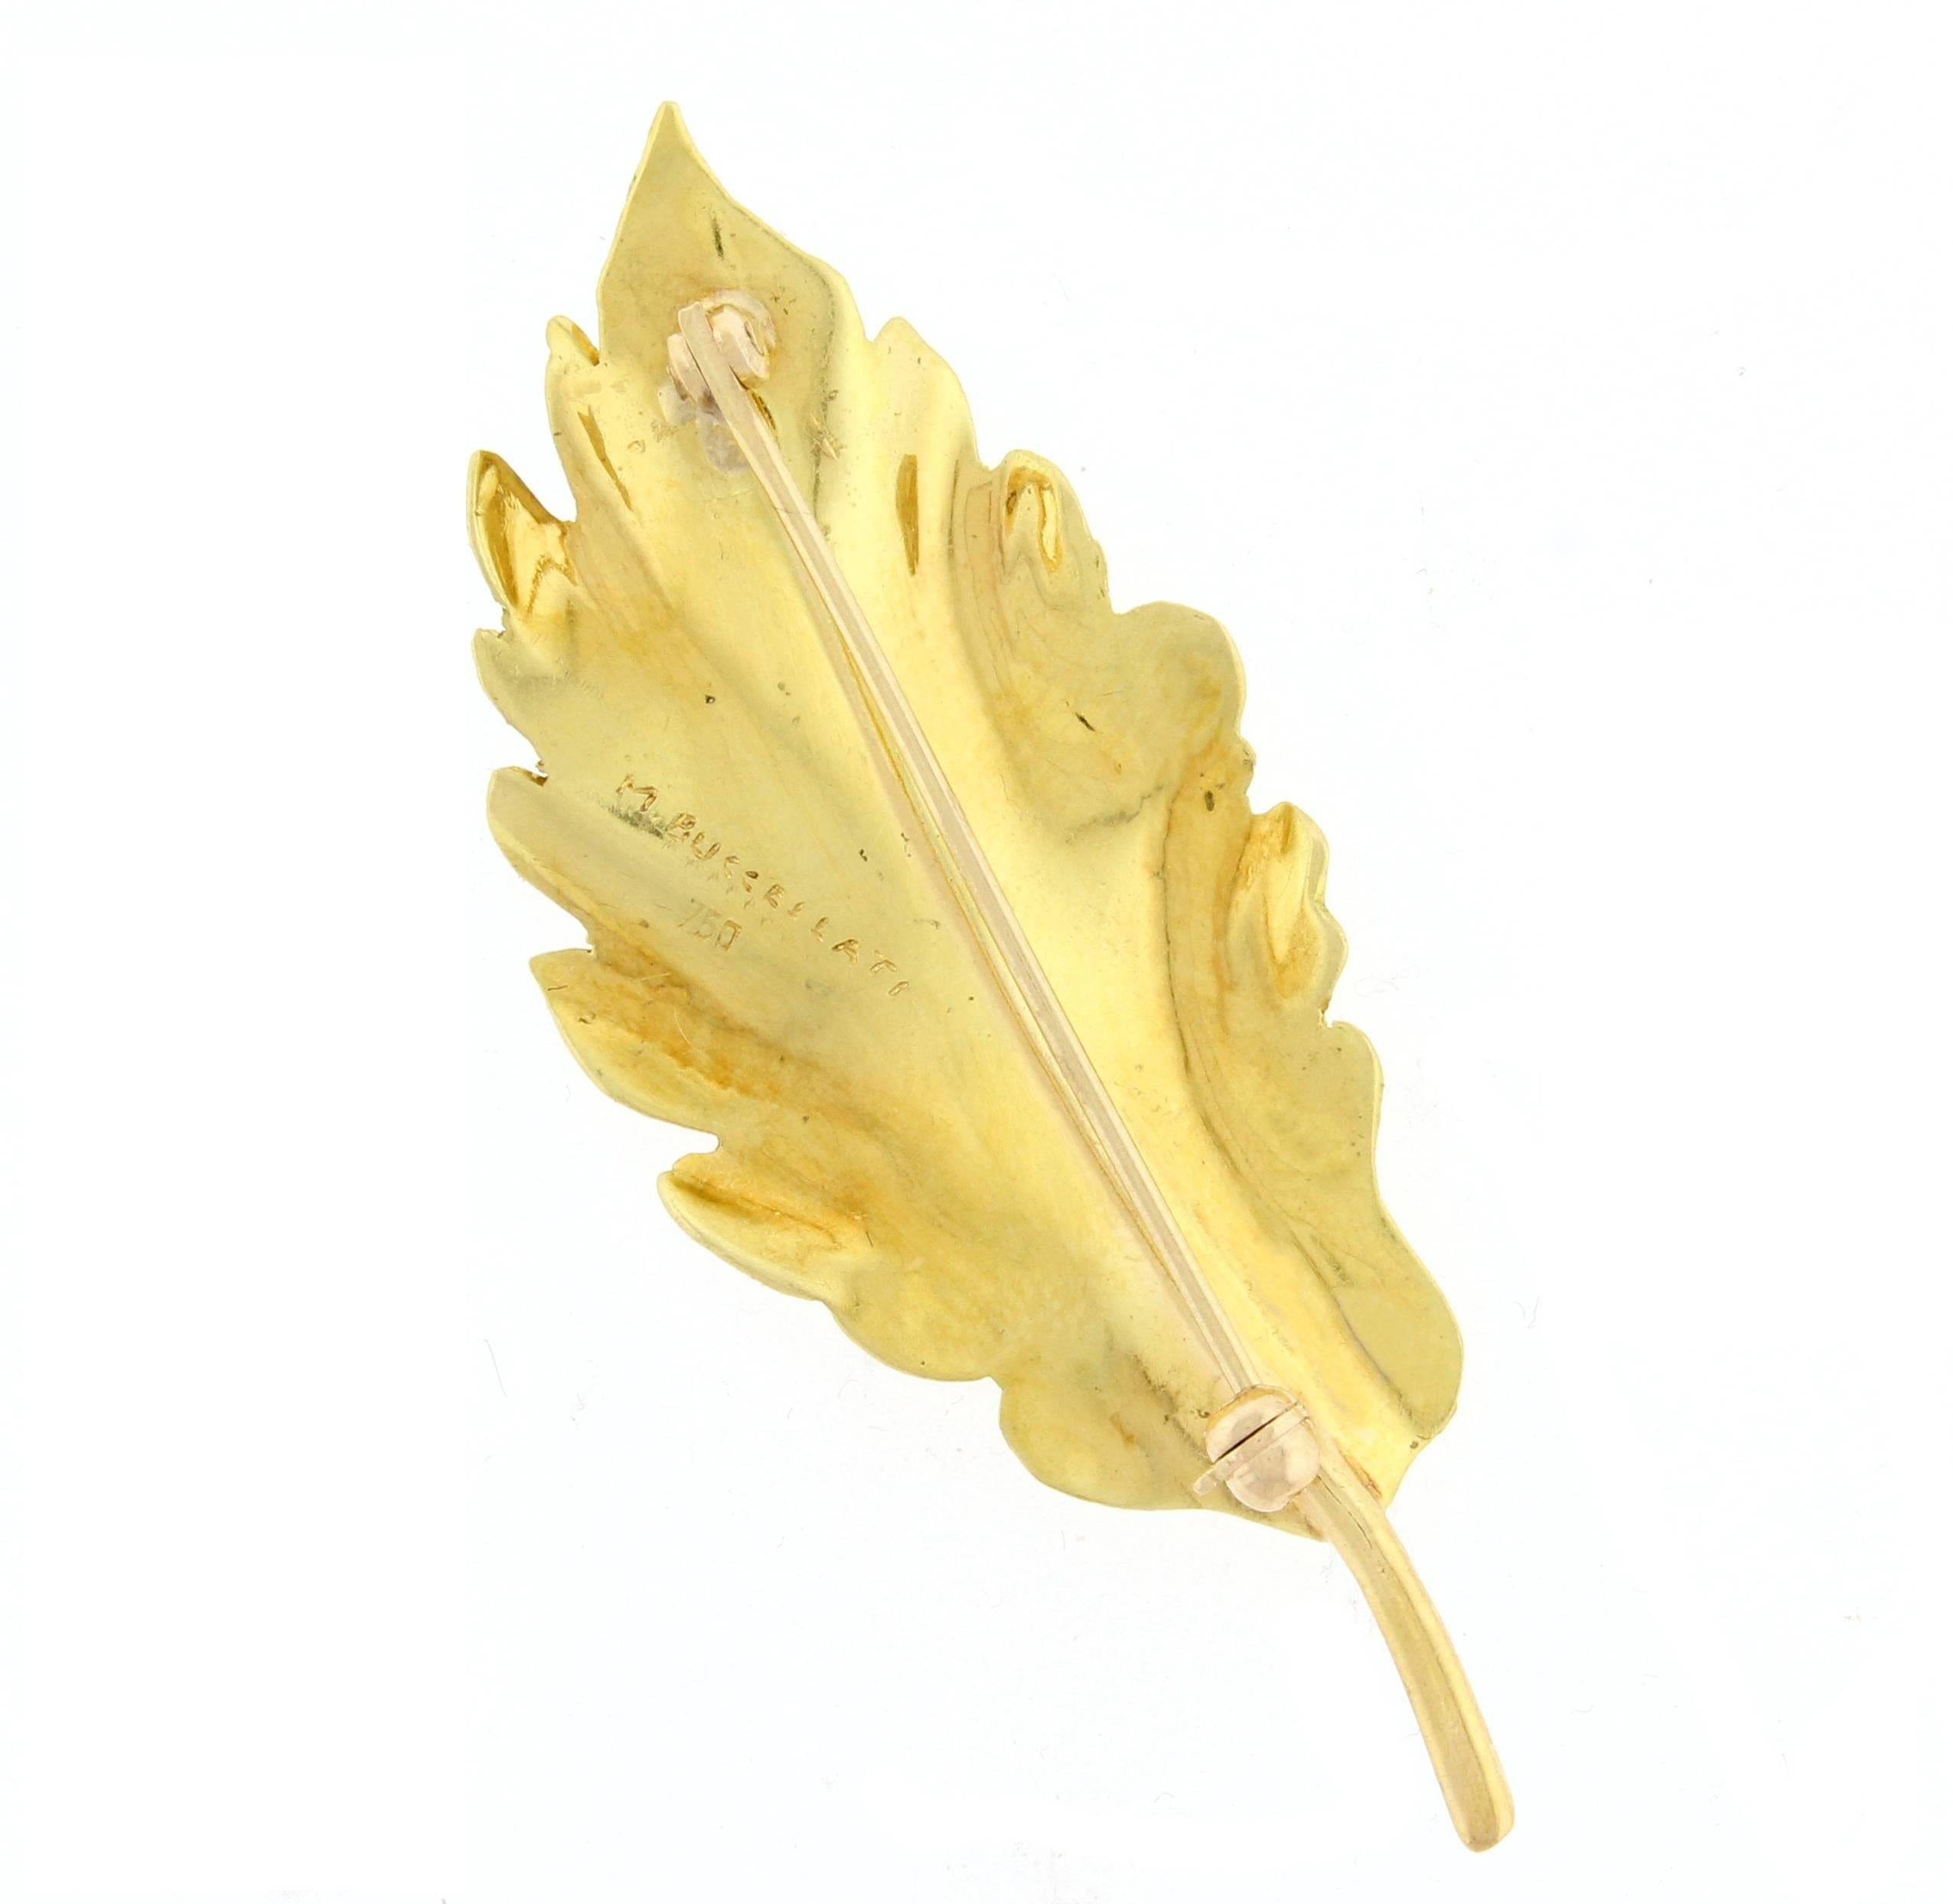 From famed Italian jeweler Mario Buccellati this wonderful leaf brooch
The 18 karat yellow gold brooch measures 2.1/8  x 7-8  of an inch and weighs 4.2 grams.